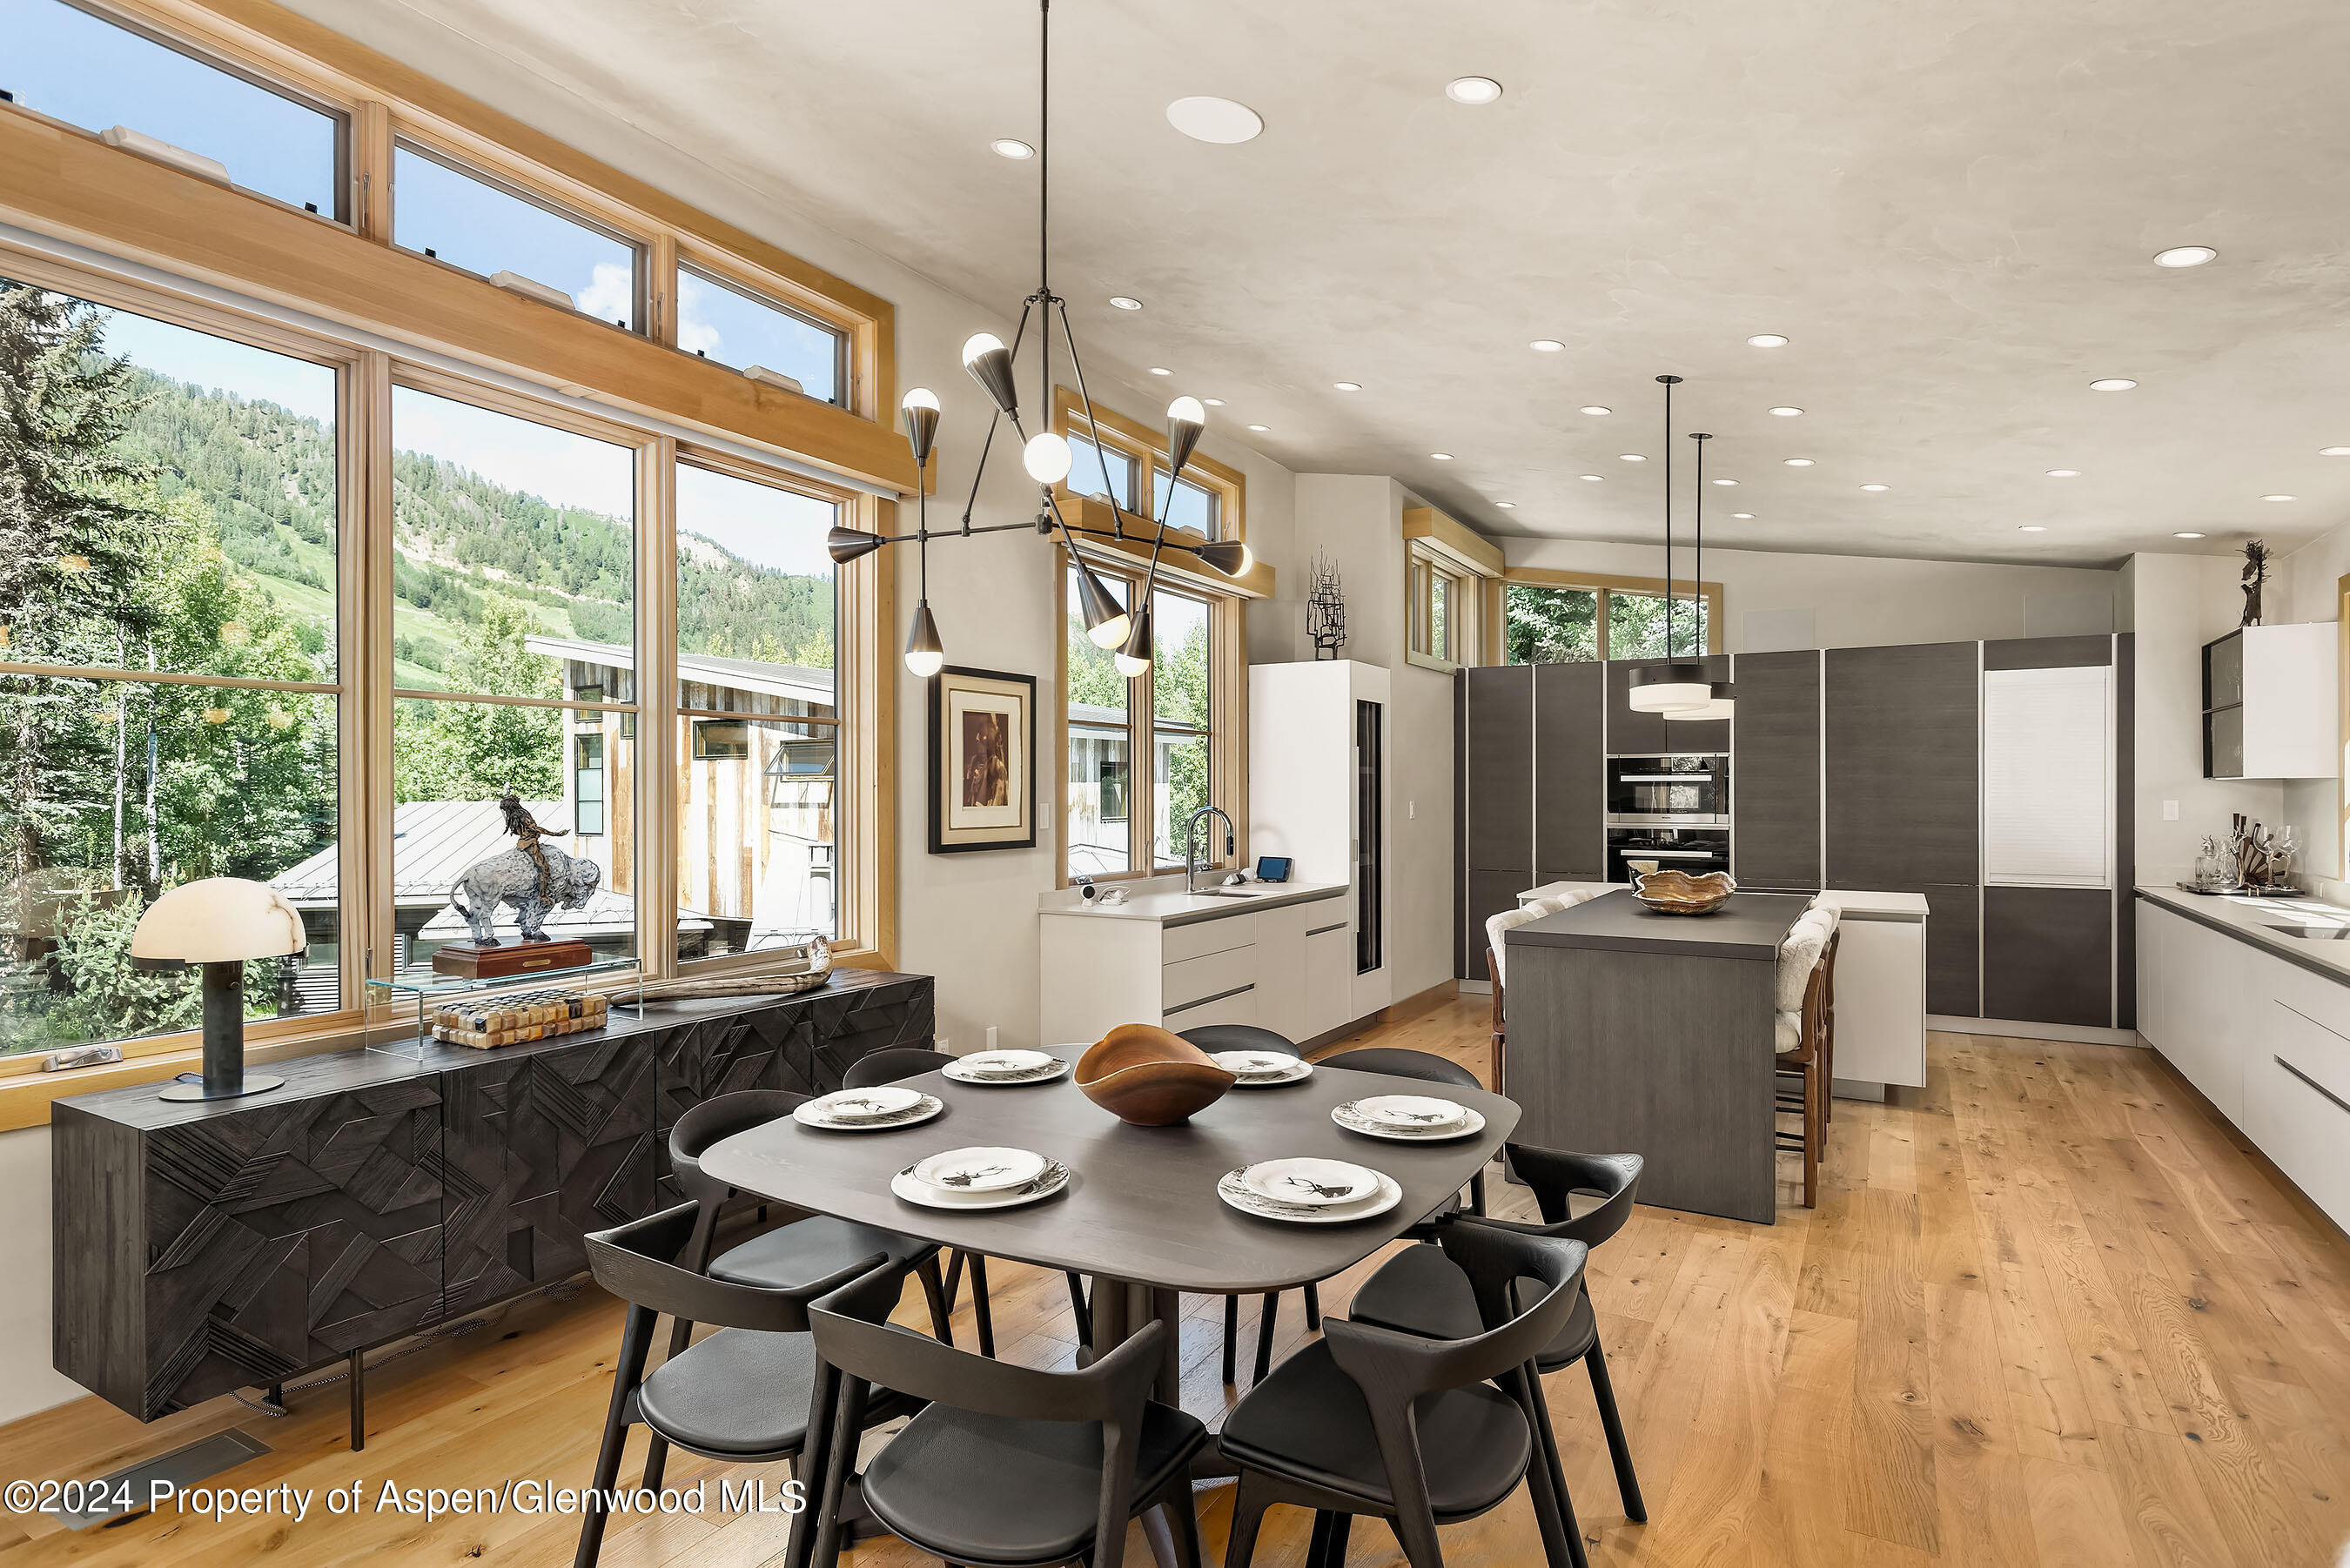 a dining room with stainless steel appliances kitchen island granite countertop a table chairs and a refrigerator